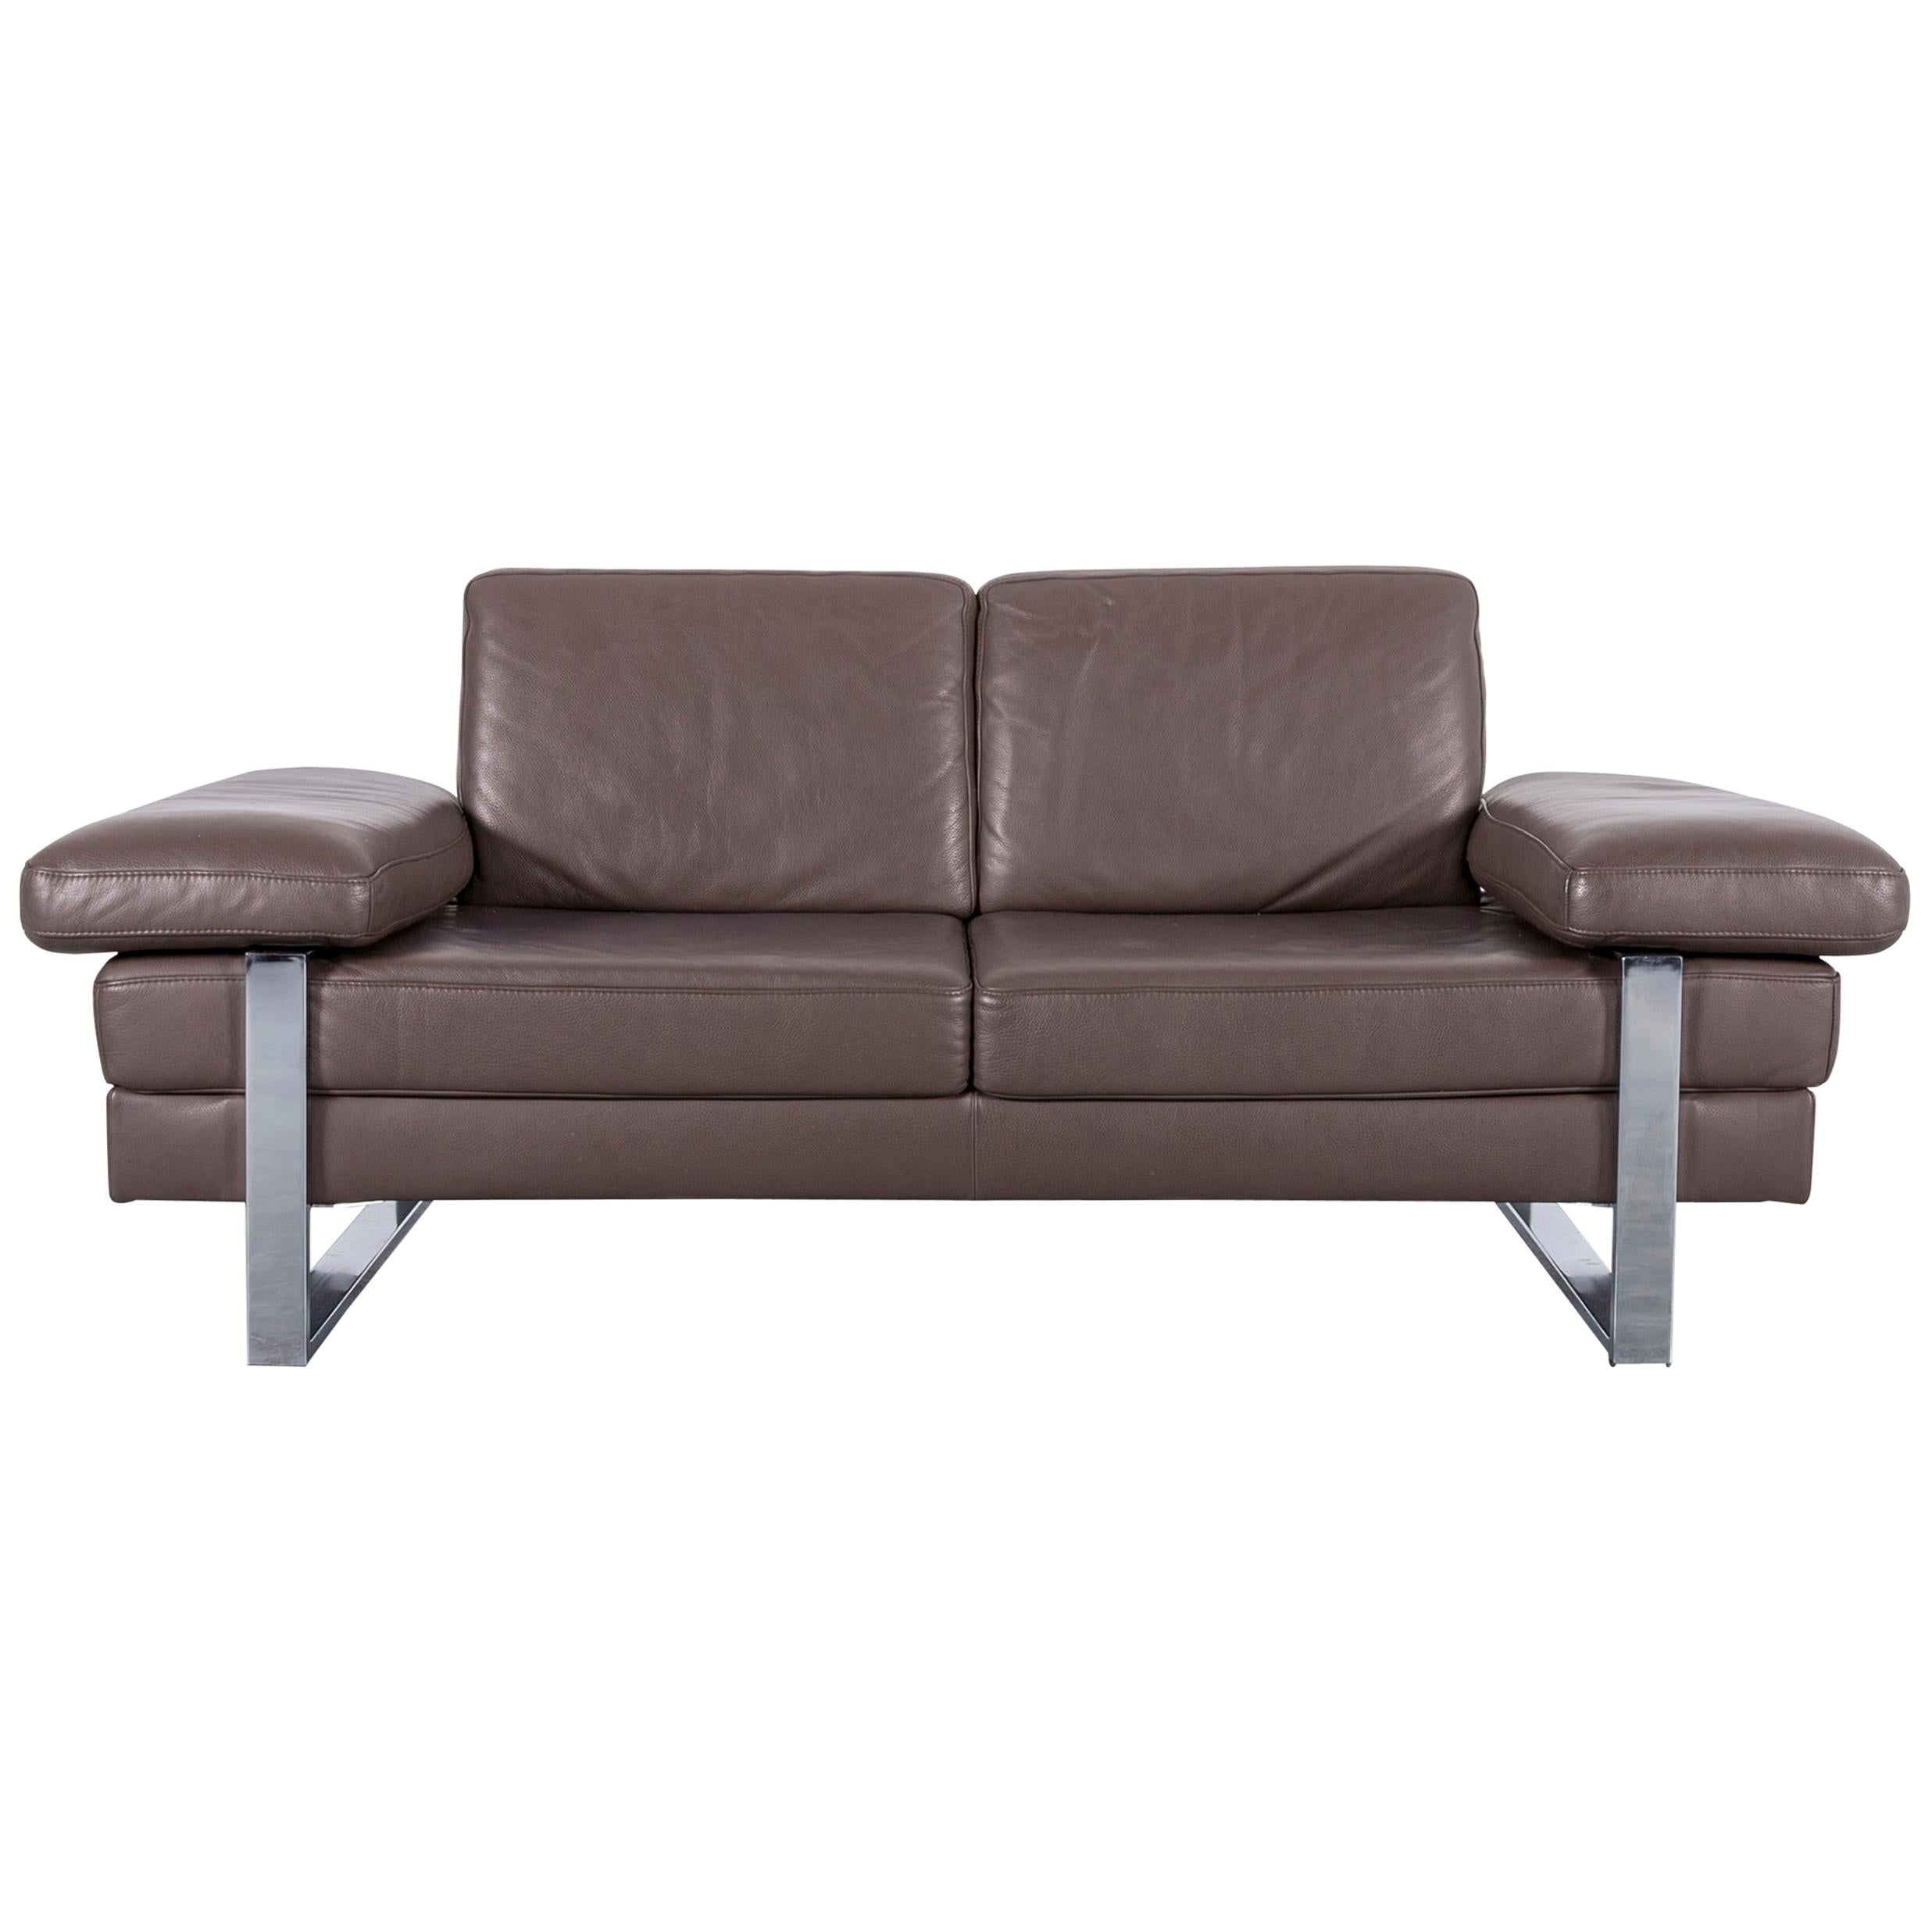 Ewald Schillig Designer Leather Sofa Brown Two-Seat For Sale